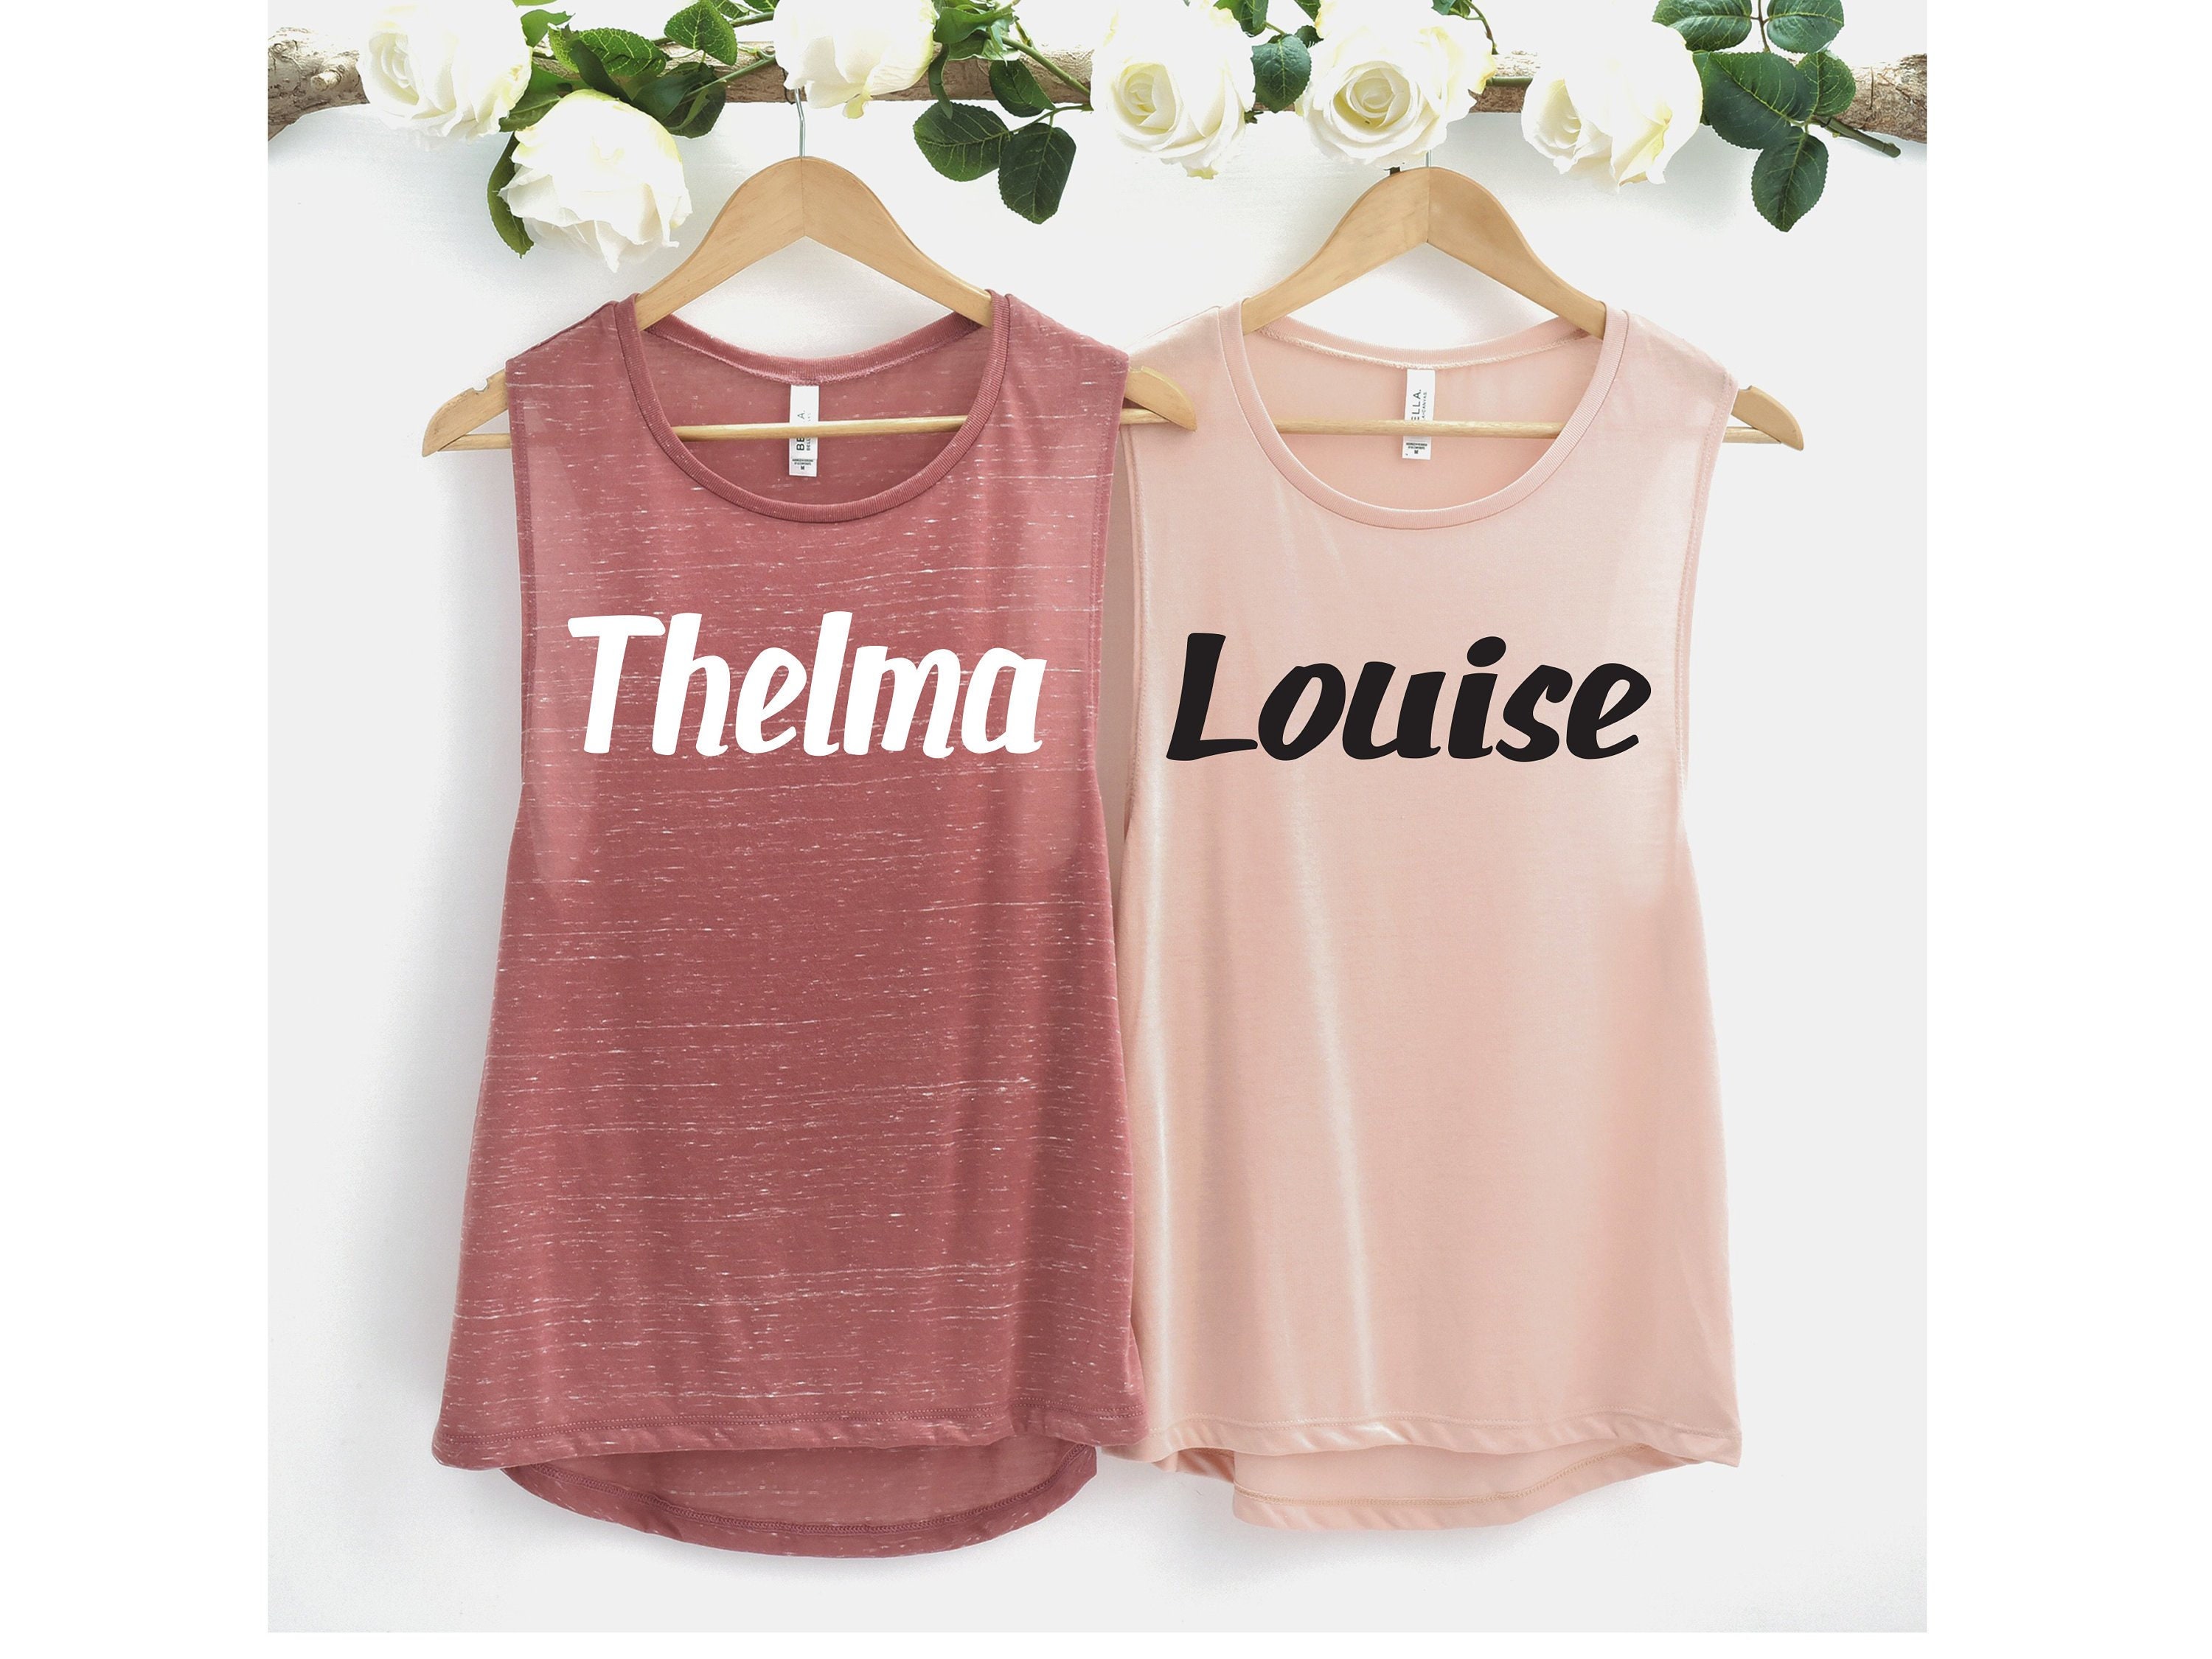 Best Friend Gifts, Shirts Tanks, Bestie Friends Muscle Tank Tops For Women, Thelma Louise Tanks Free Shipping Not Vinyl